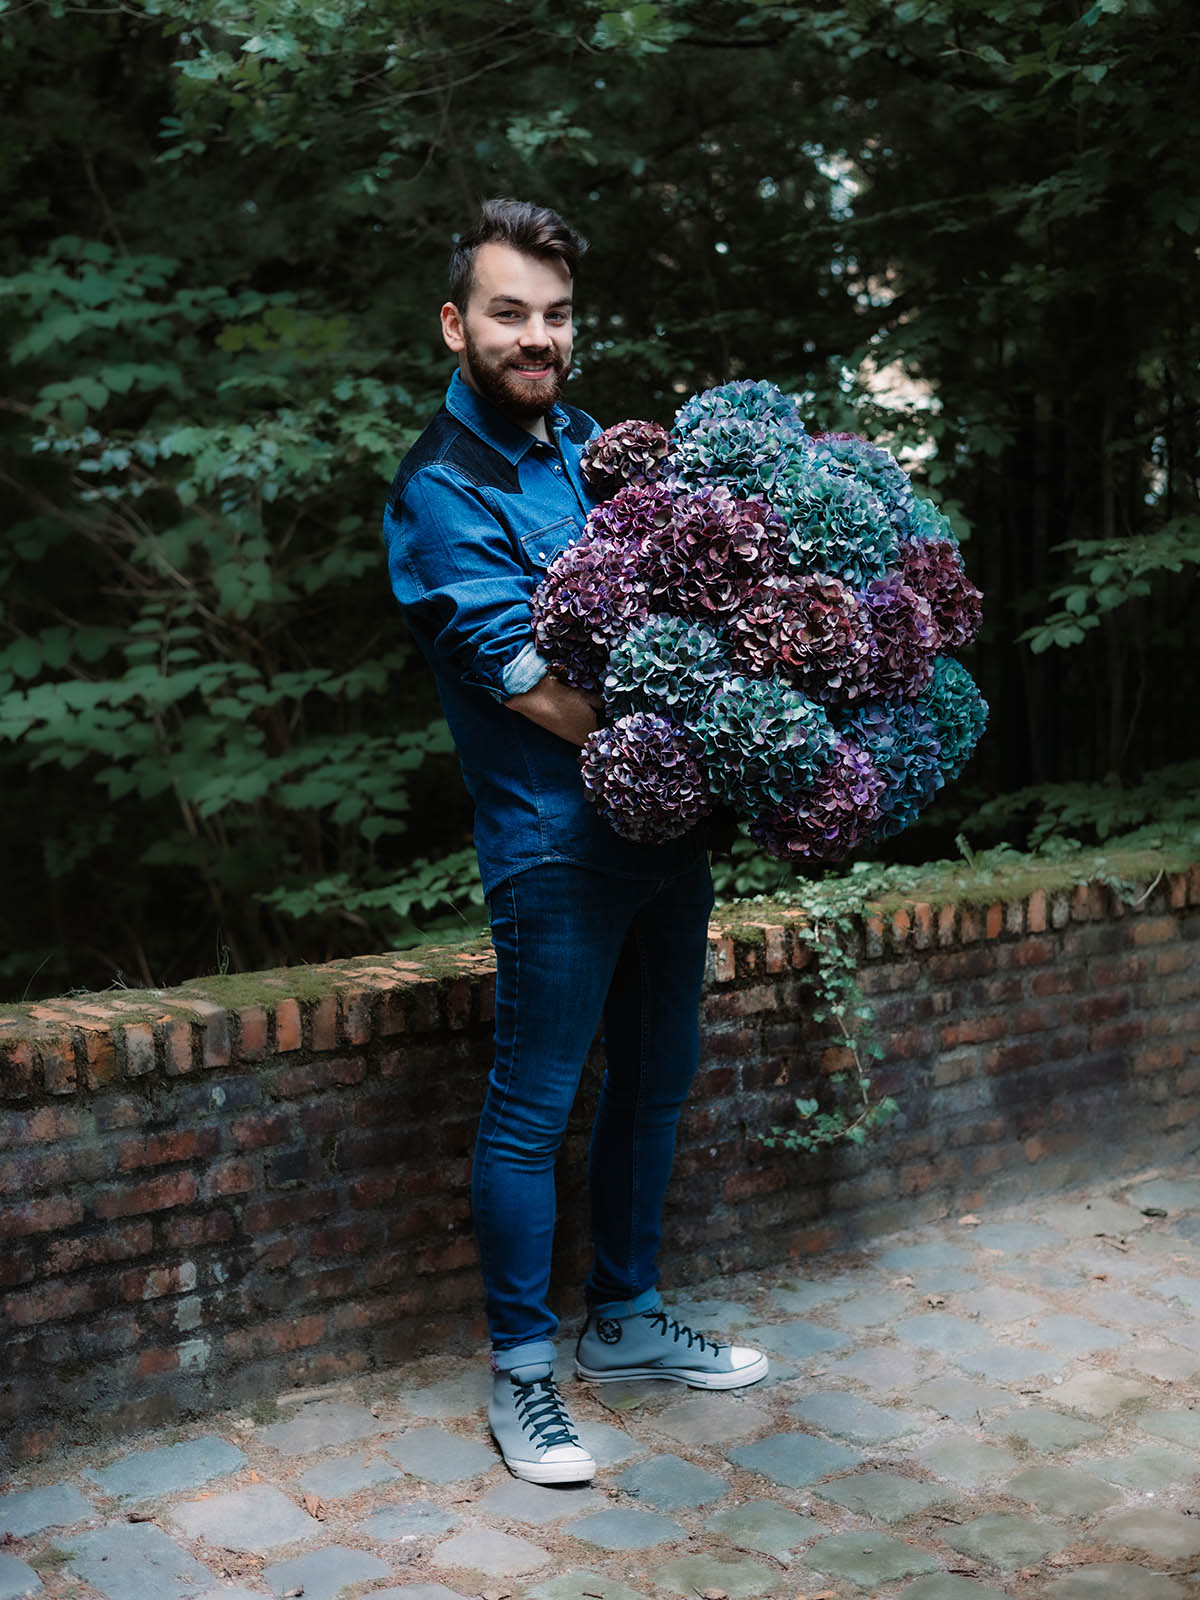 How to Make Hydrangeas Pimpernel Classic & Red Ruby Classic Stand Out - Martijn Schevernels 01